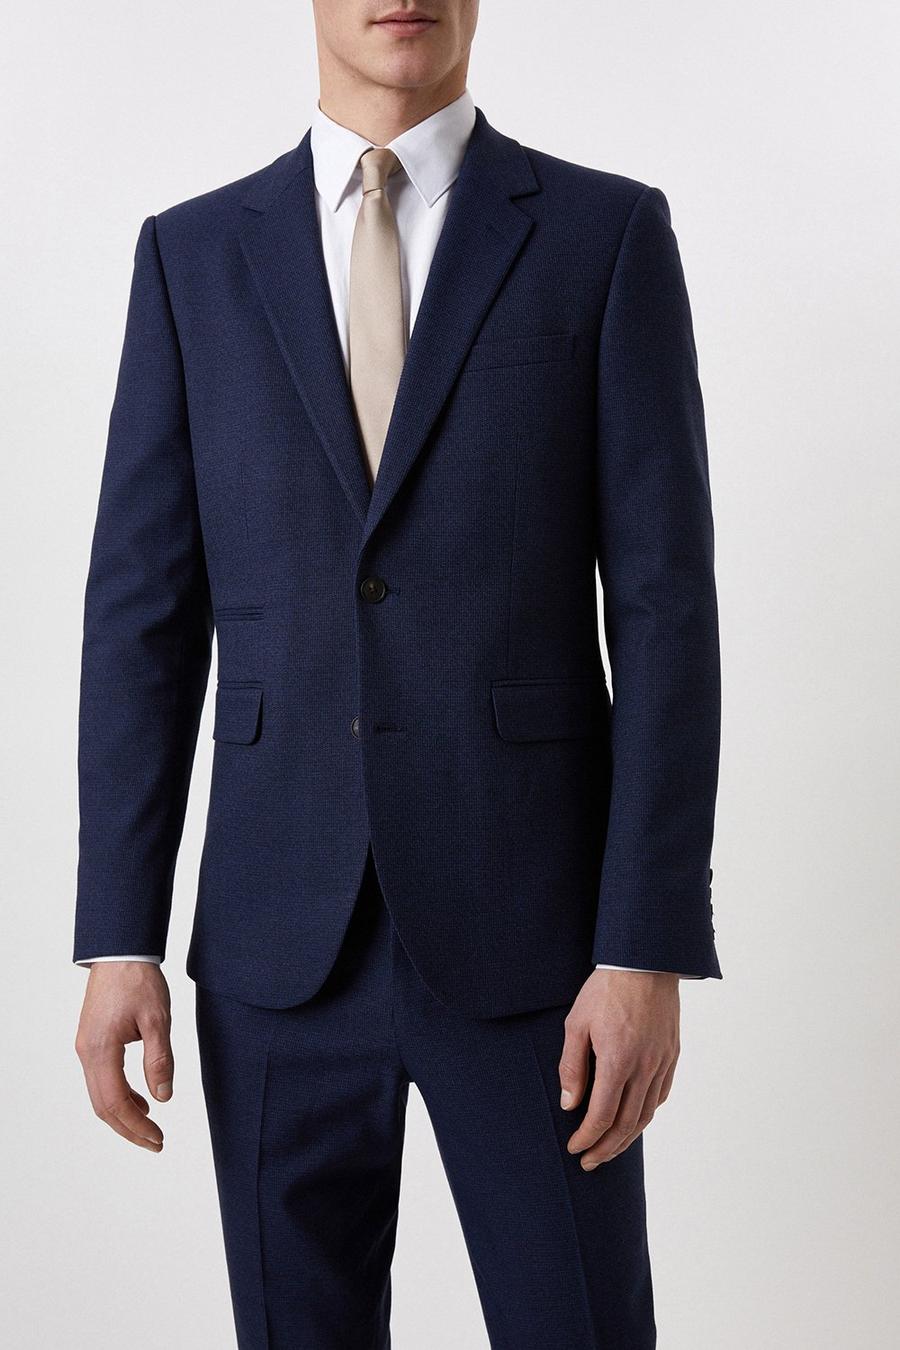 Plus And Tall Slim Fit Navy Marl Two-Piece Suit